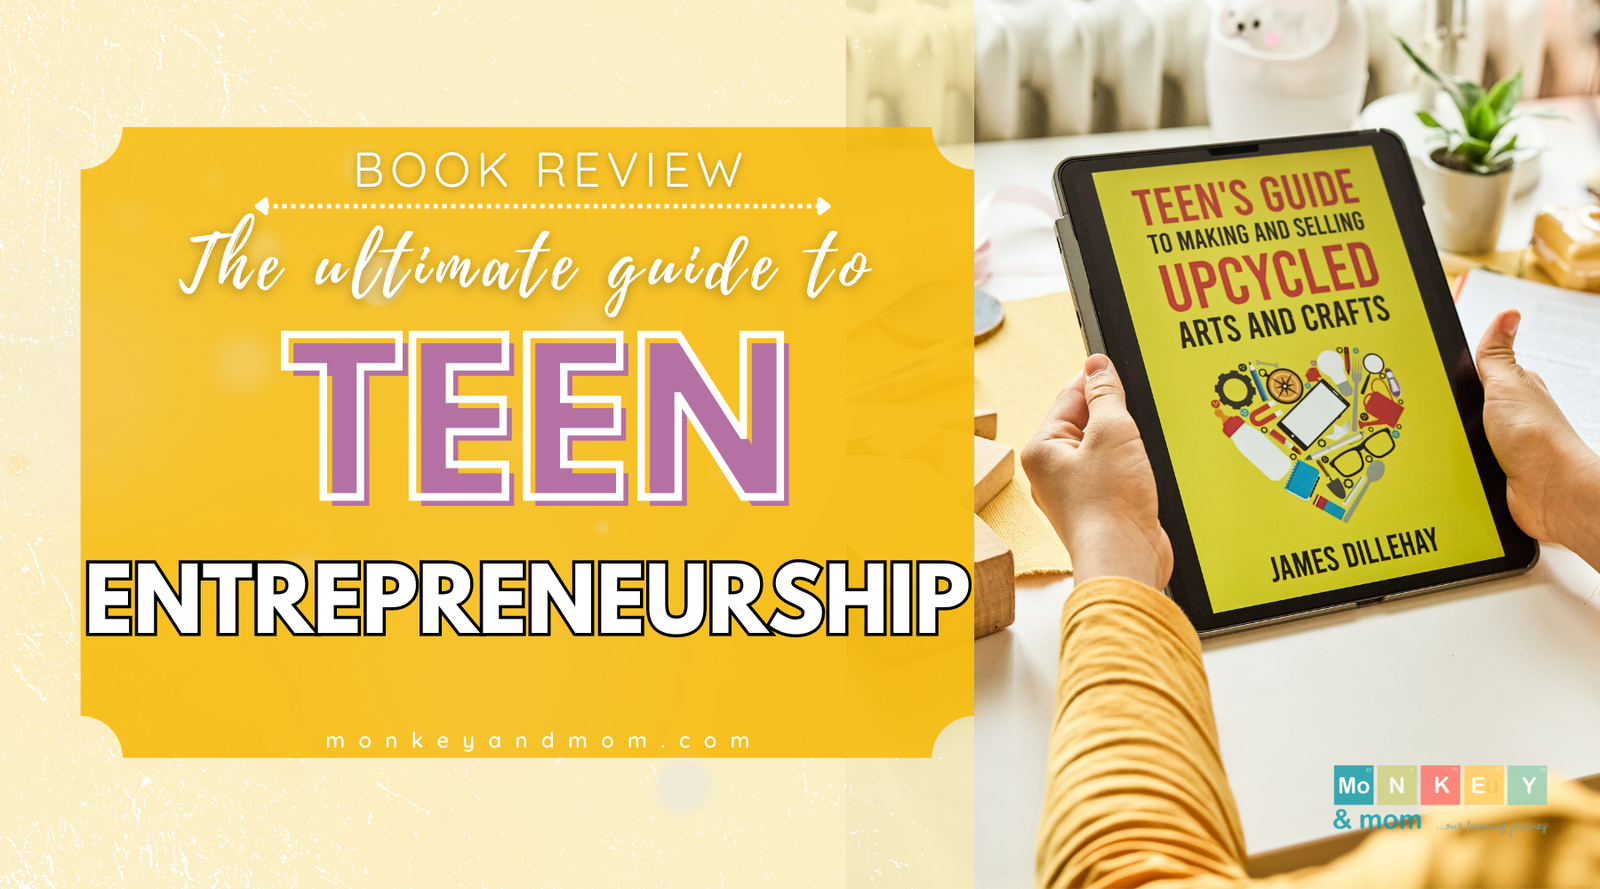 The ultimate guide to teen entrepreneurship- Teen's Guide to making and selling upcycled arts and crafts book review